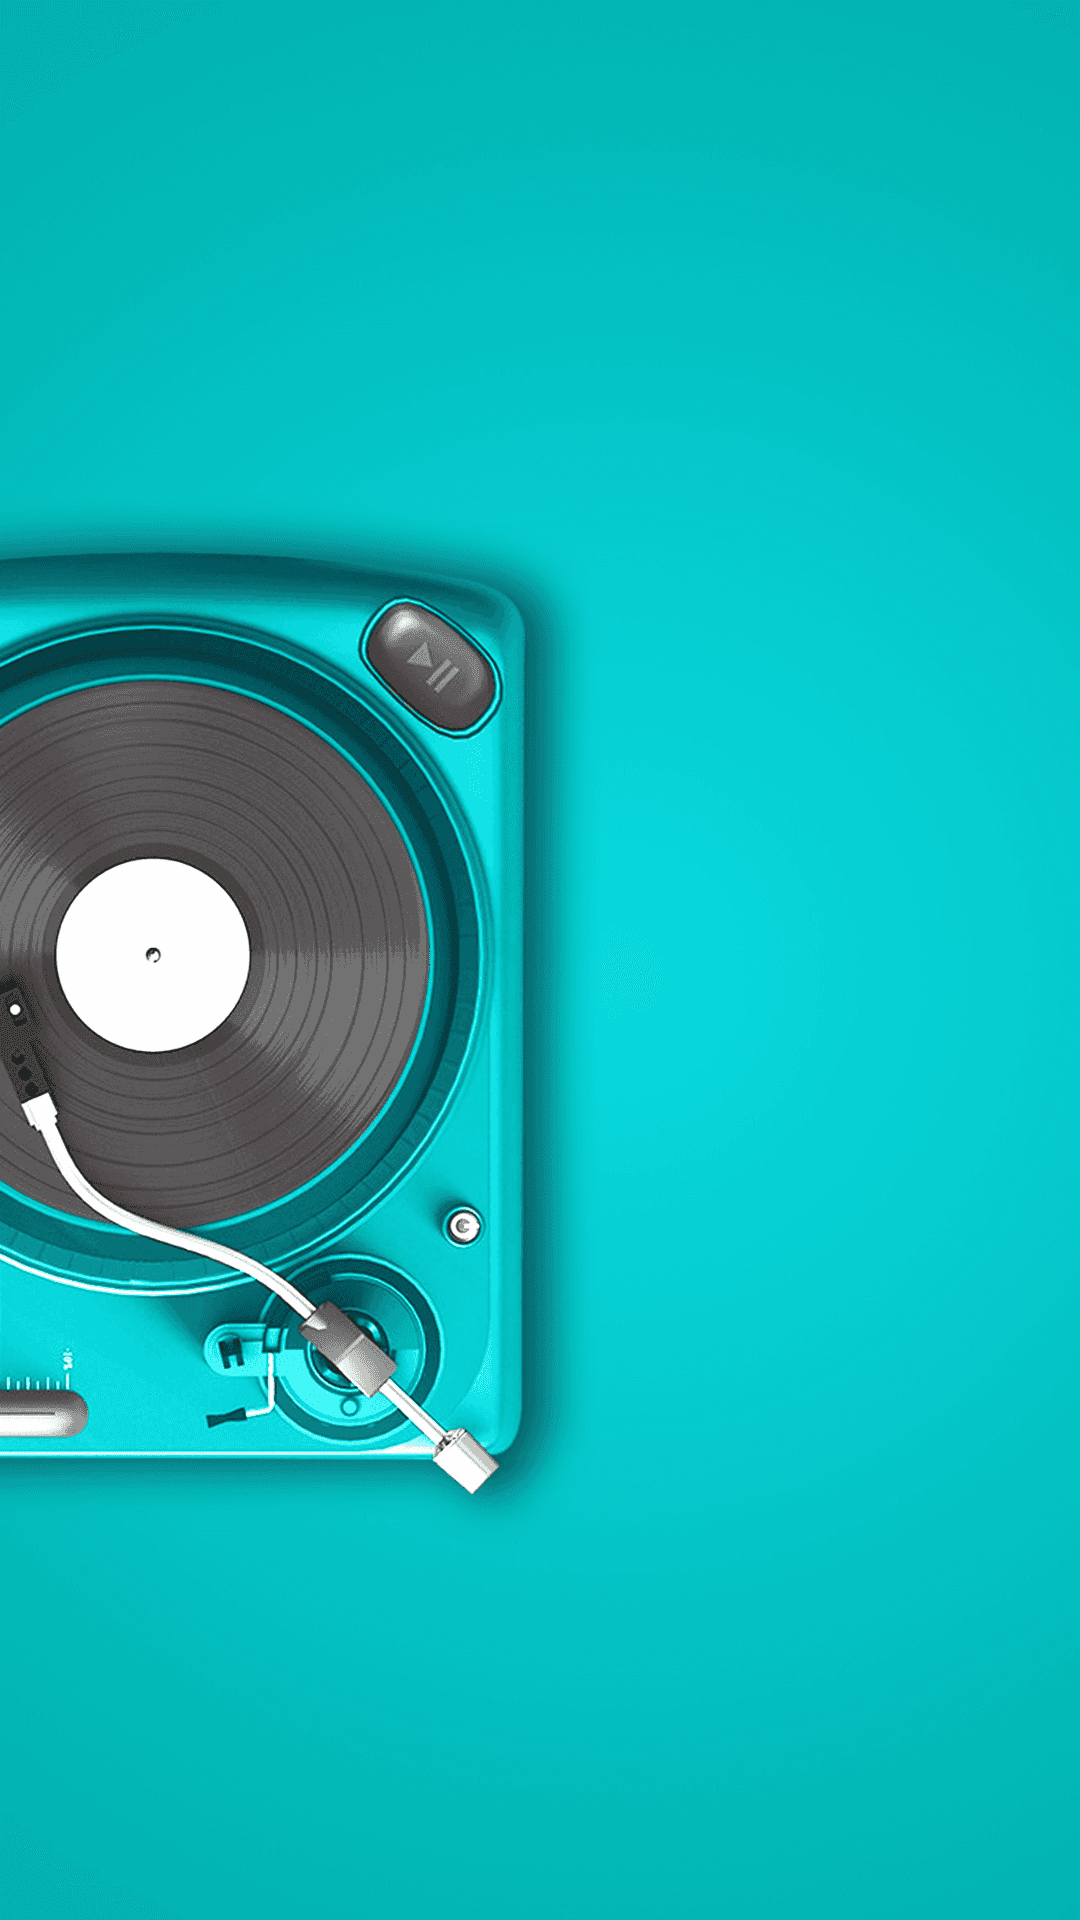 Cyan Turntable Music Concept